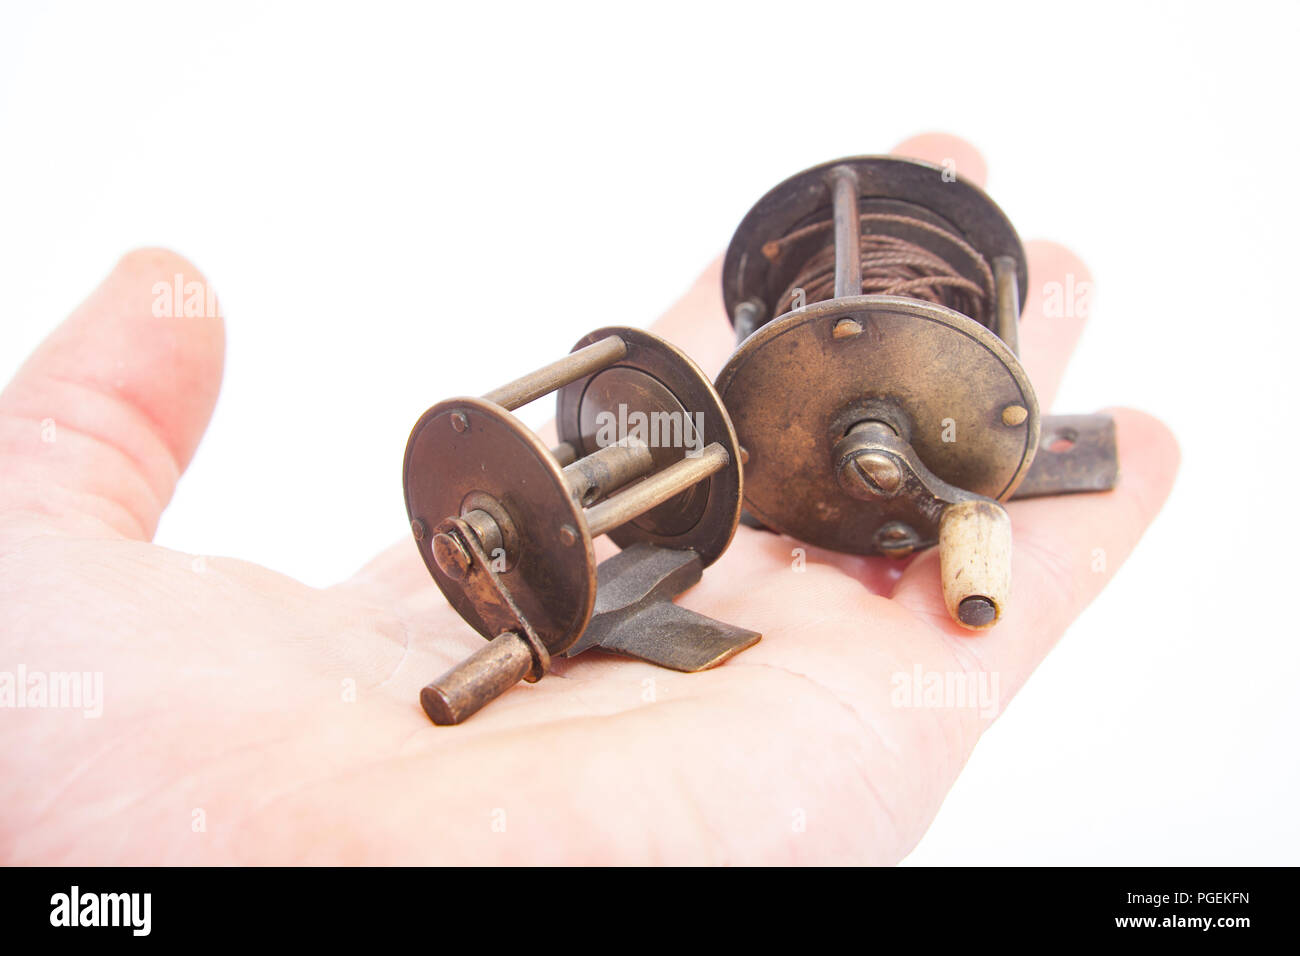 Antique wooden fly fishing reel Stock Photo - Alamy